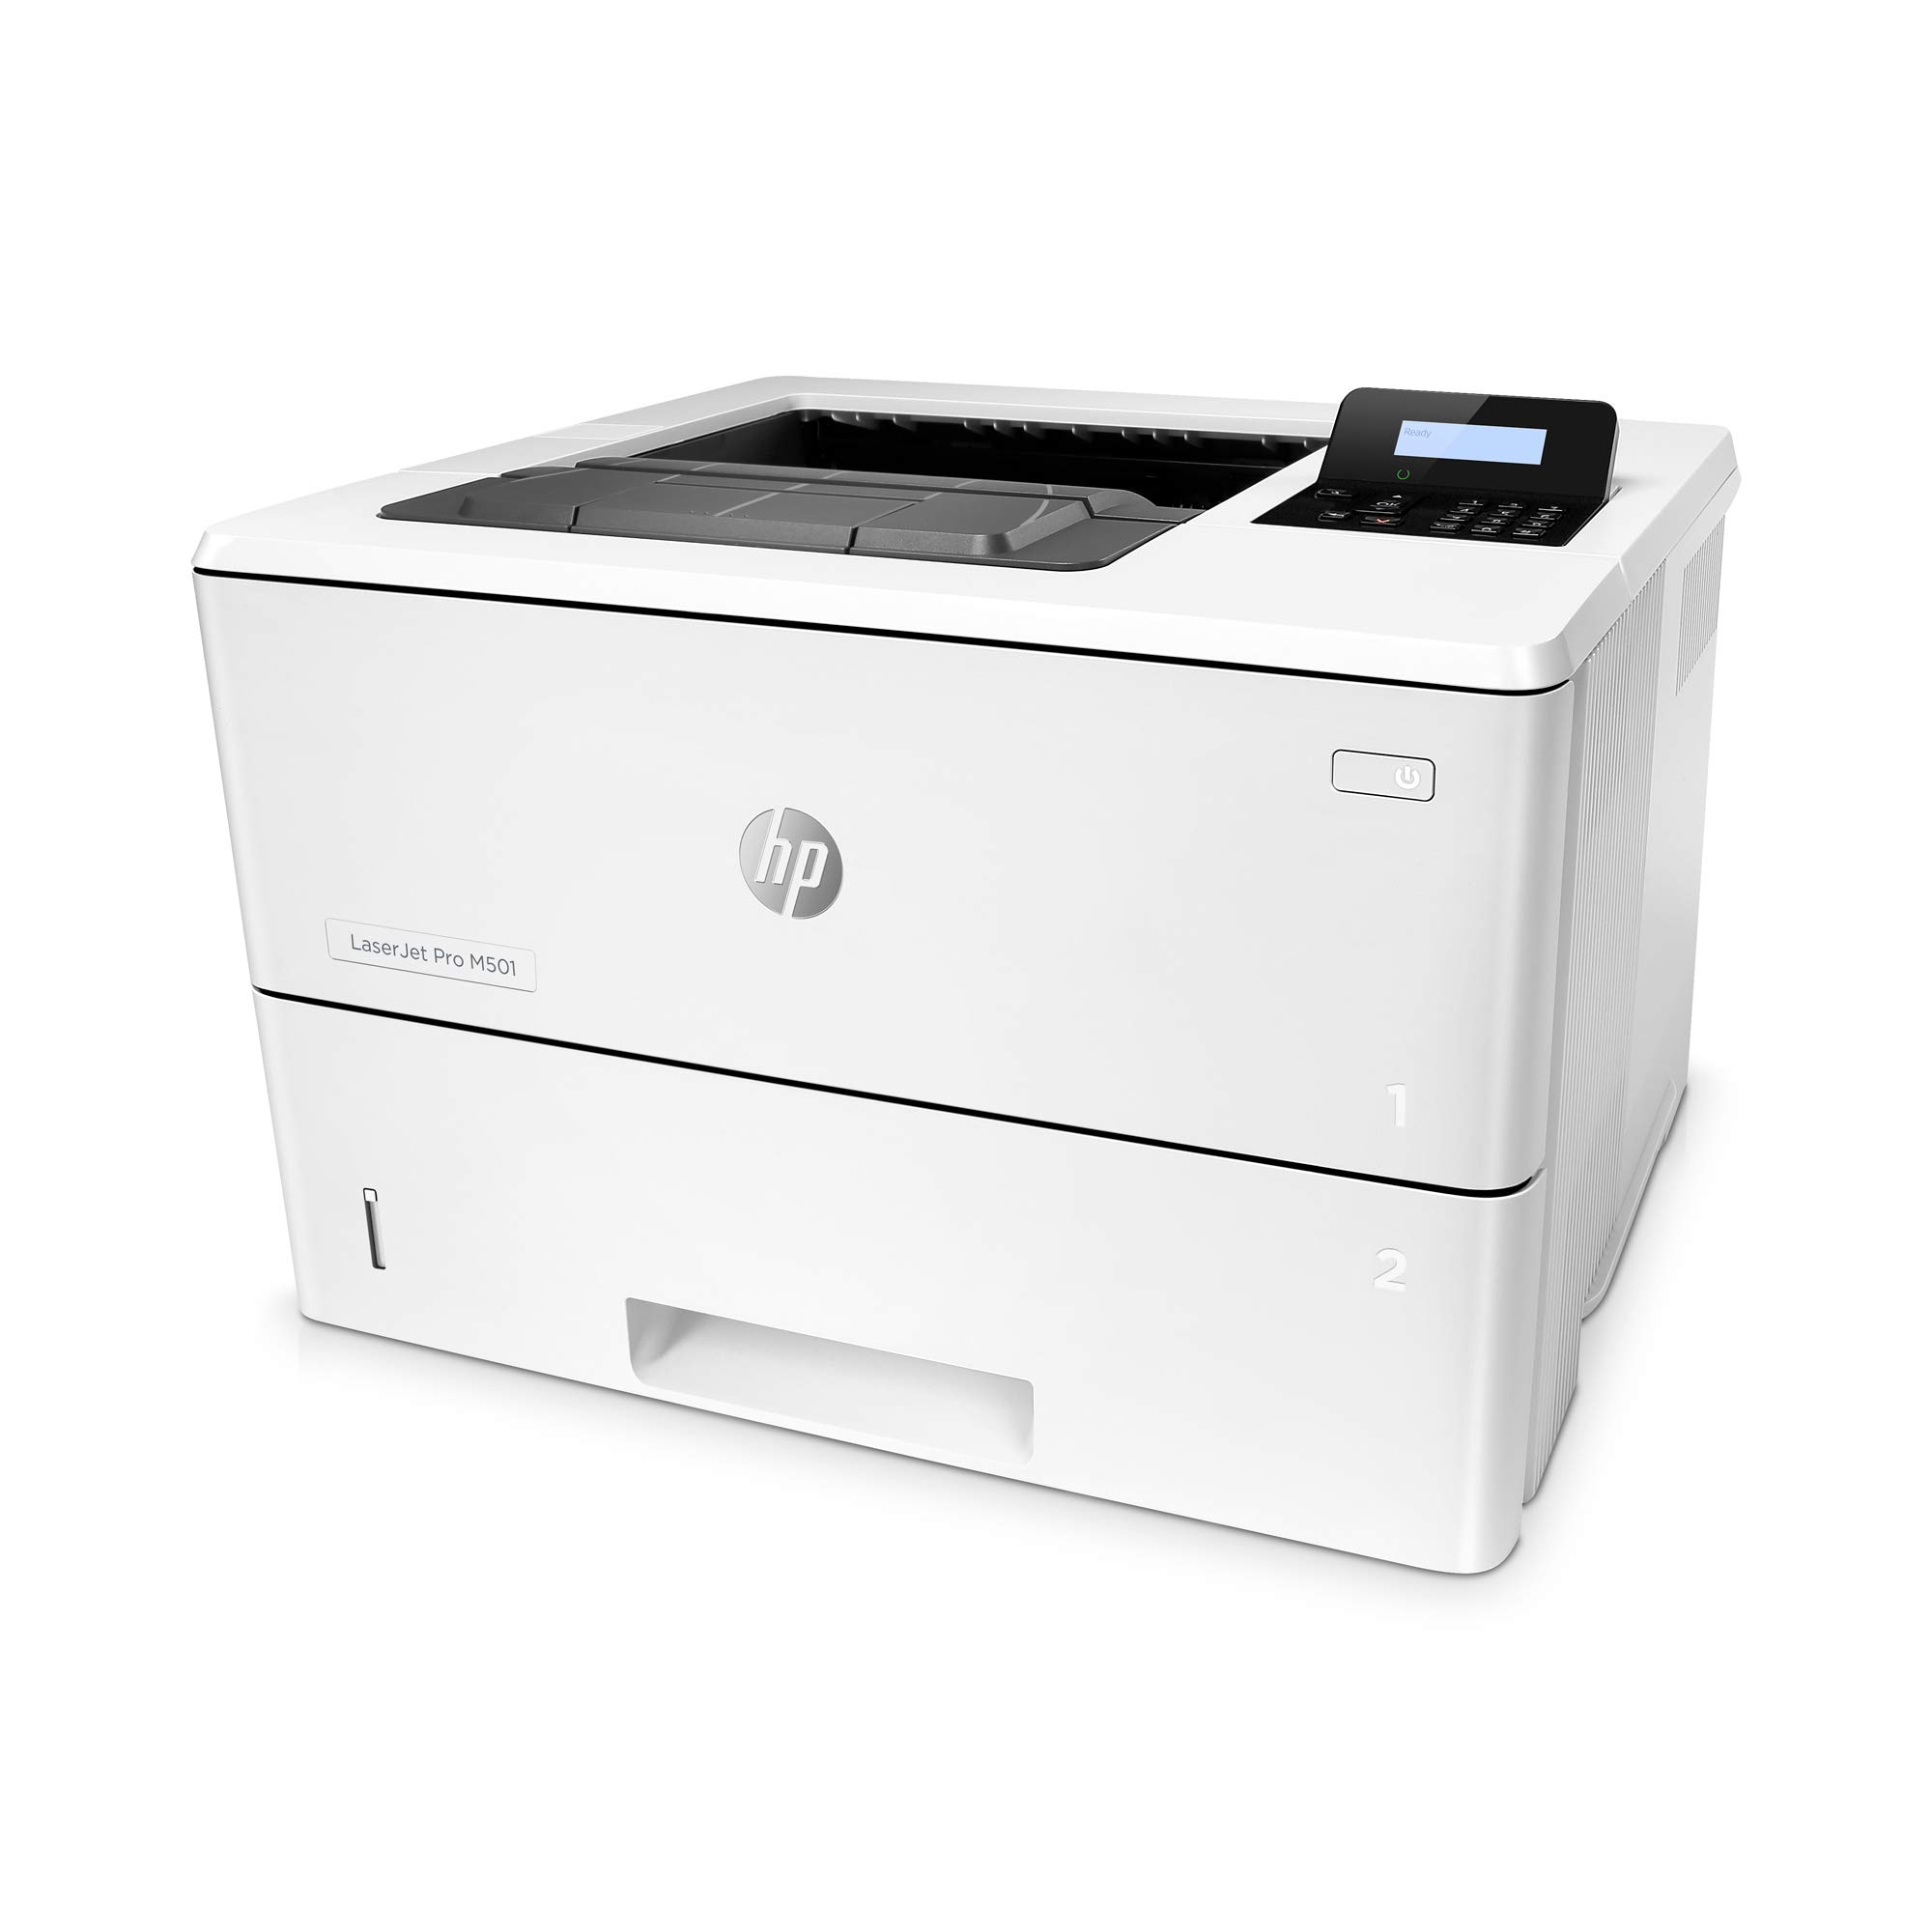 HP LaserJet Pro M501dn Monochrome Printer with built-in Ethernet & 2-sided printing (J8H61A), Light Gray